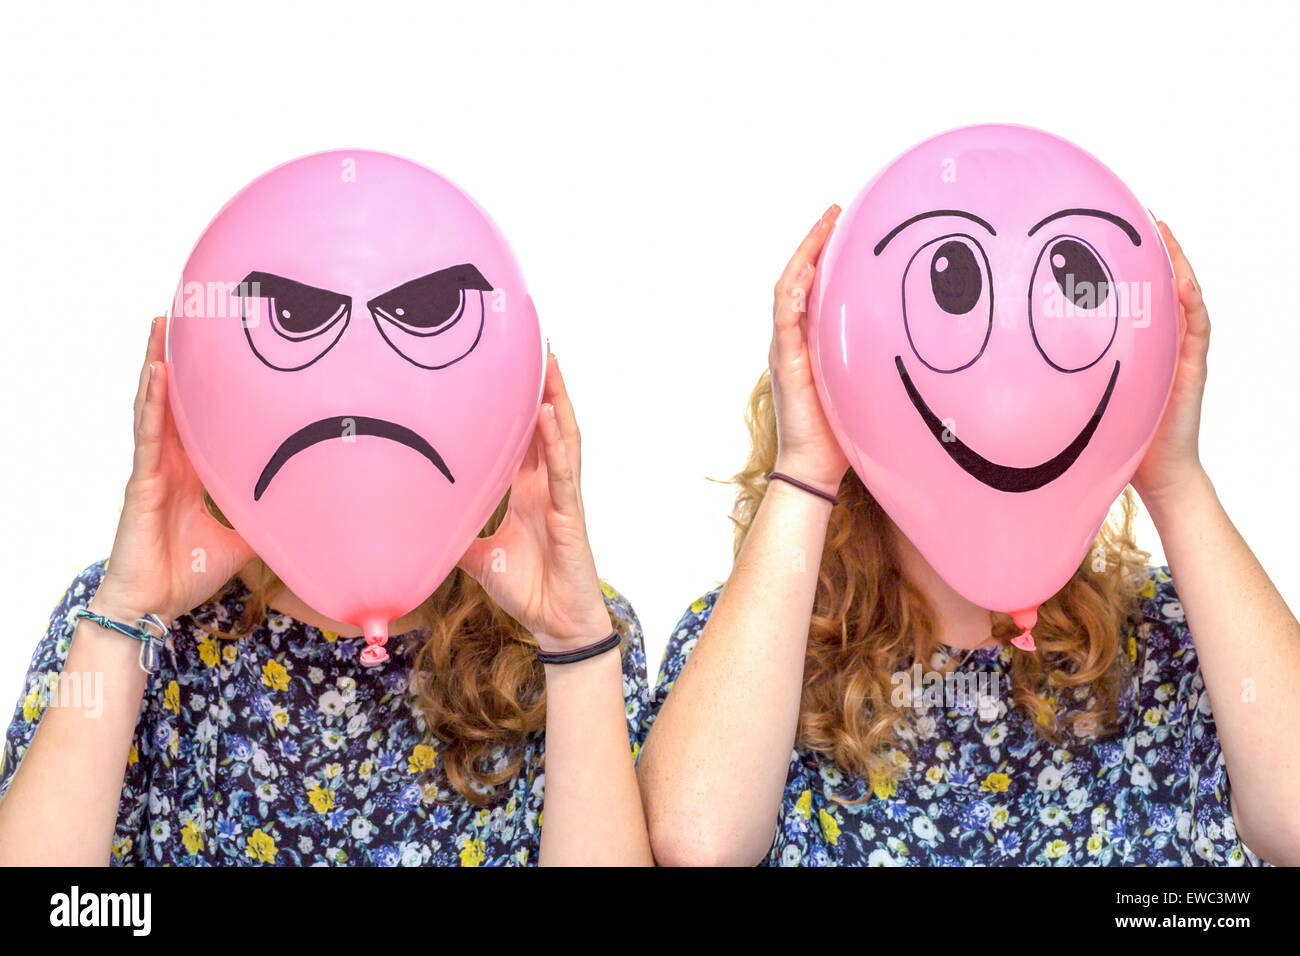 Two girls holding pink balloons with facial expressions of frustrated and smiling face isolated on white background Stock Photo